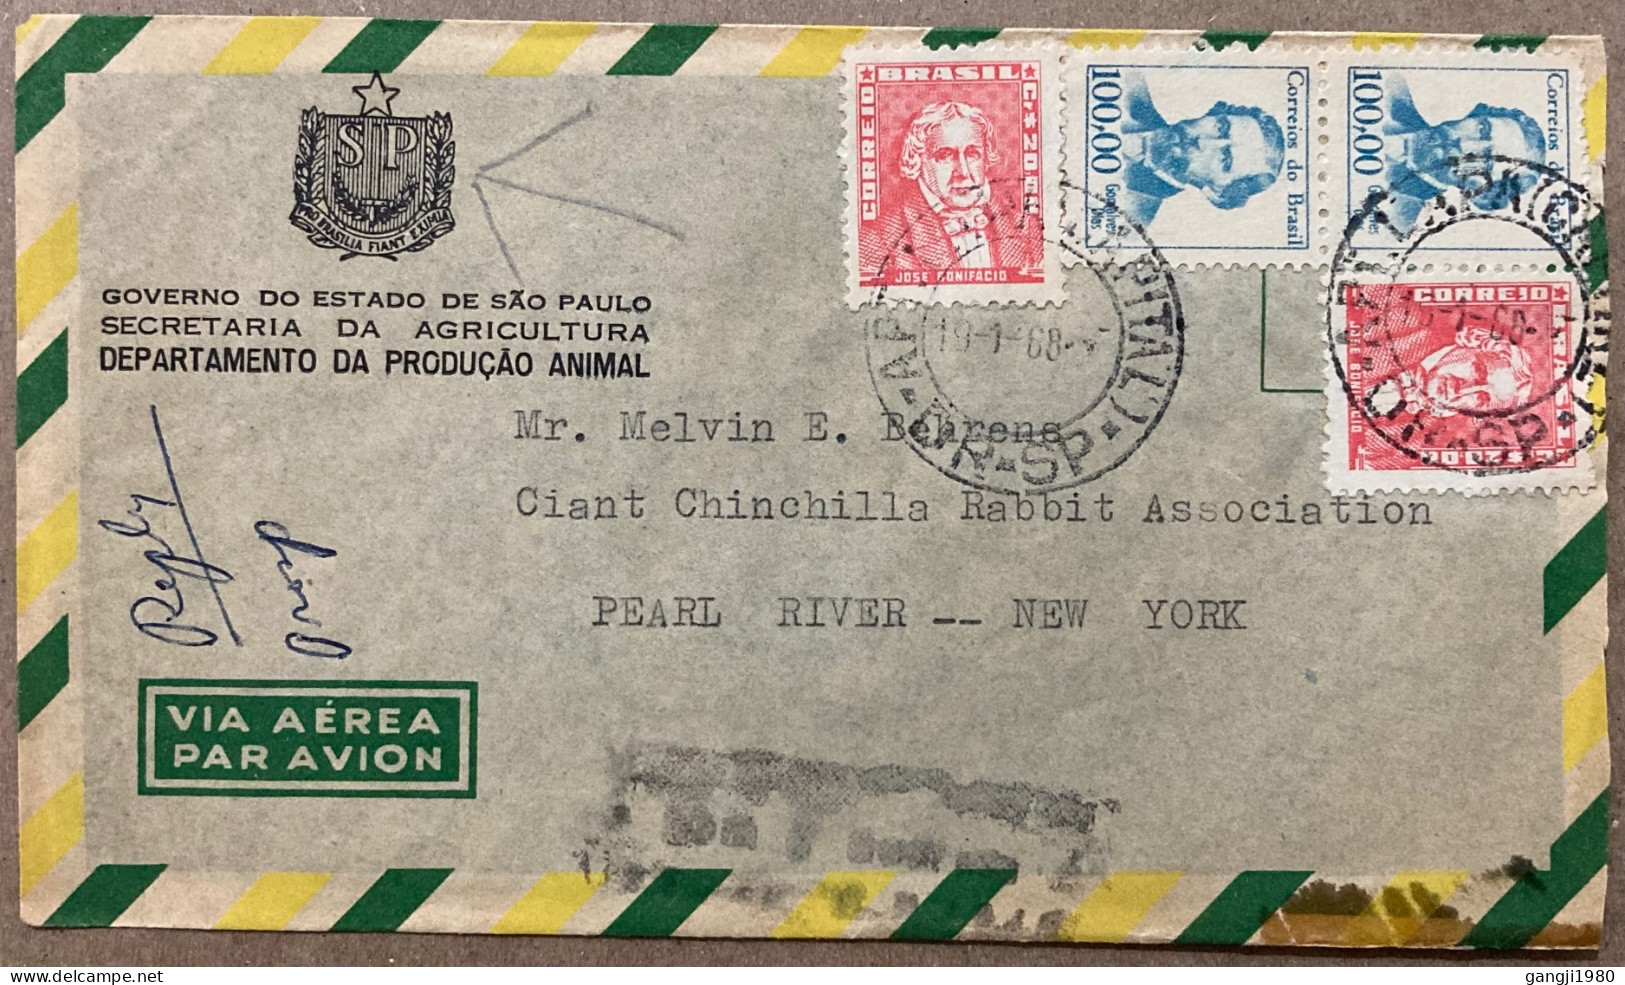 BRAZIL1968, COVER USED TO USA, ADVERTISING COVER, AGRICULTURE MINISTRY, ANIMAL & RABBIT BREEDER, IMPORT- EXPORT, ENCLOSE - Lettres & Documents